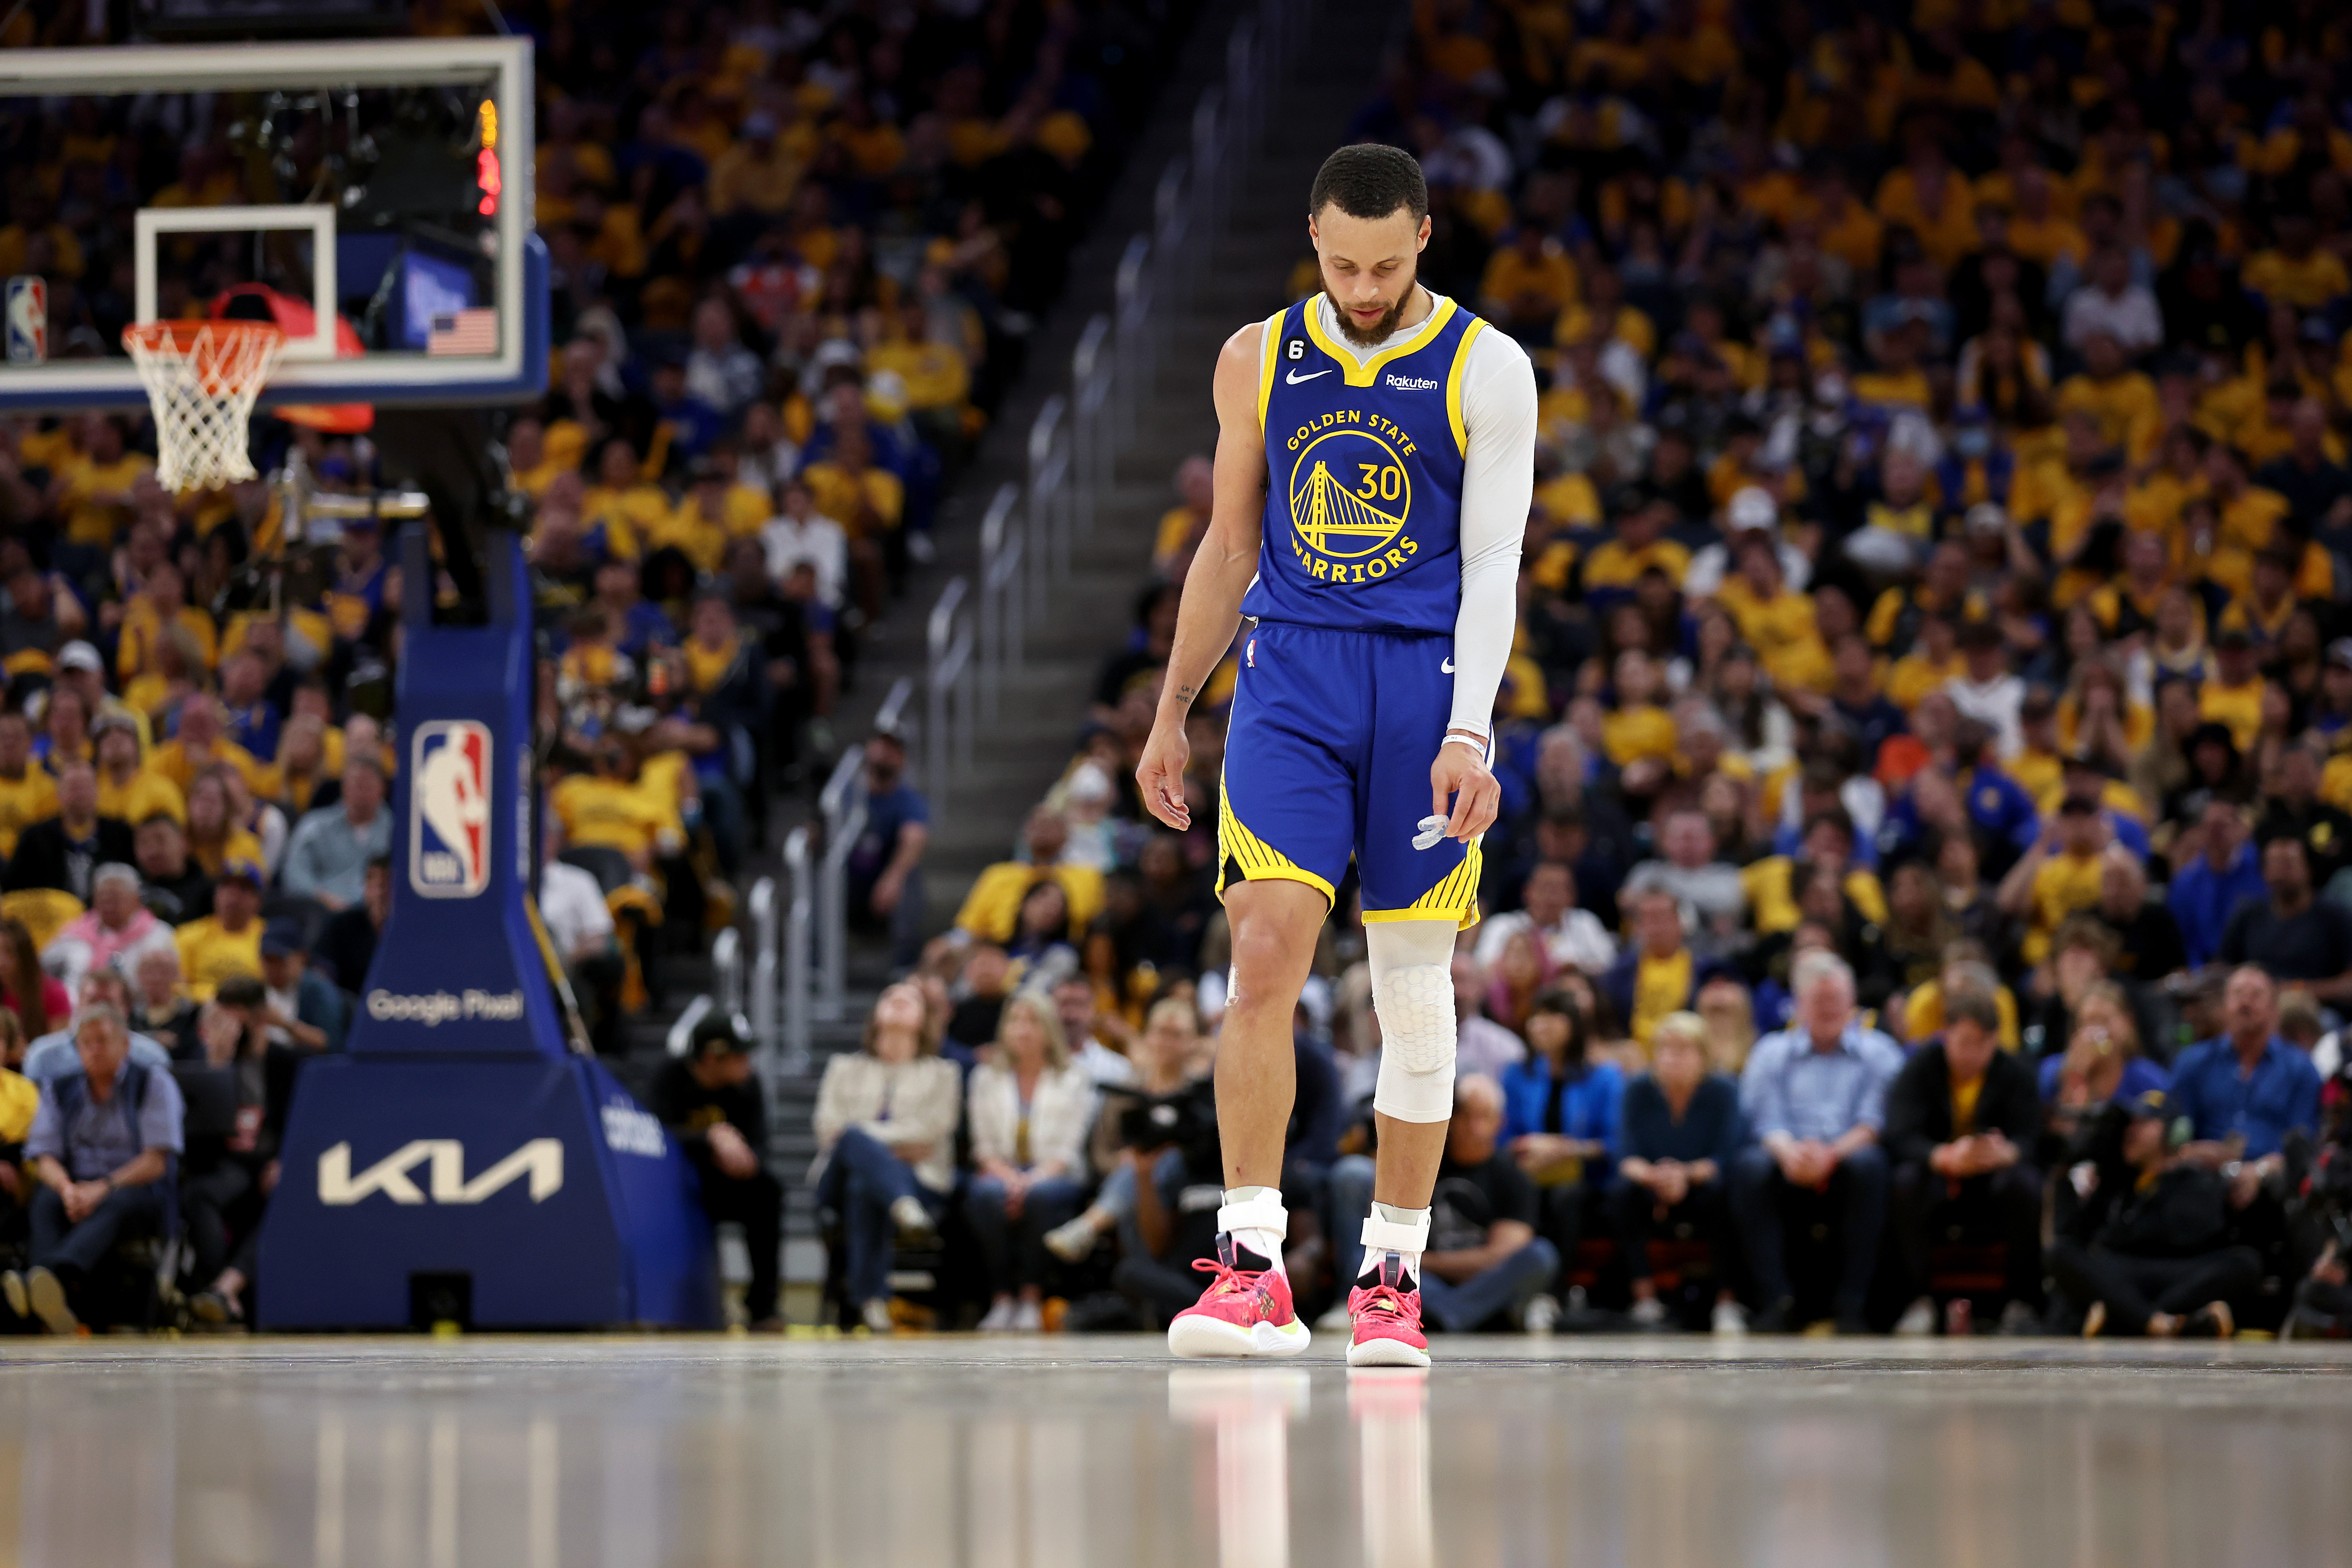 Steph Curry walking off the court, dejected